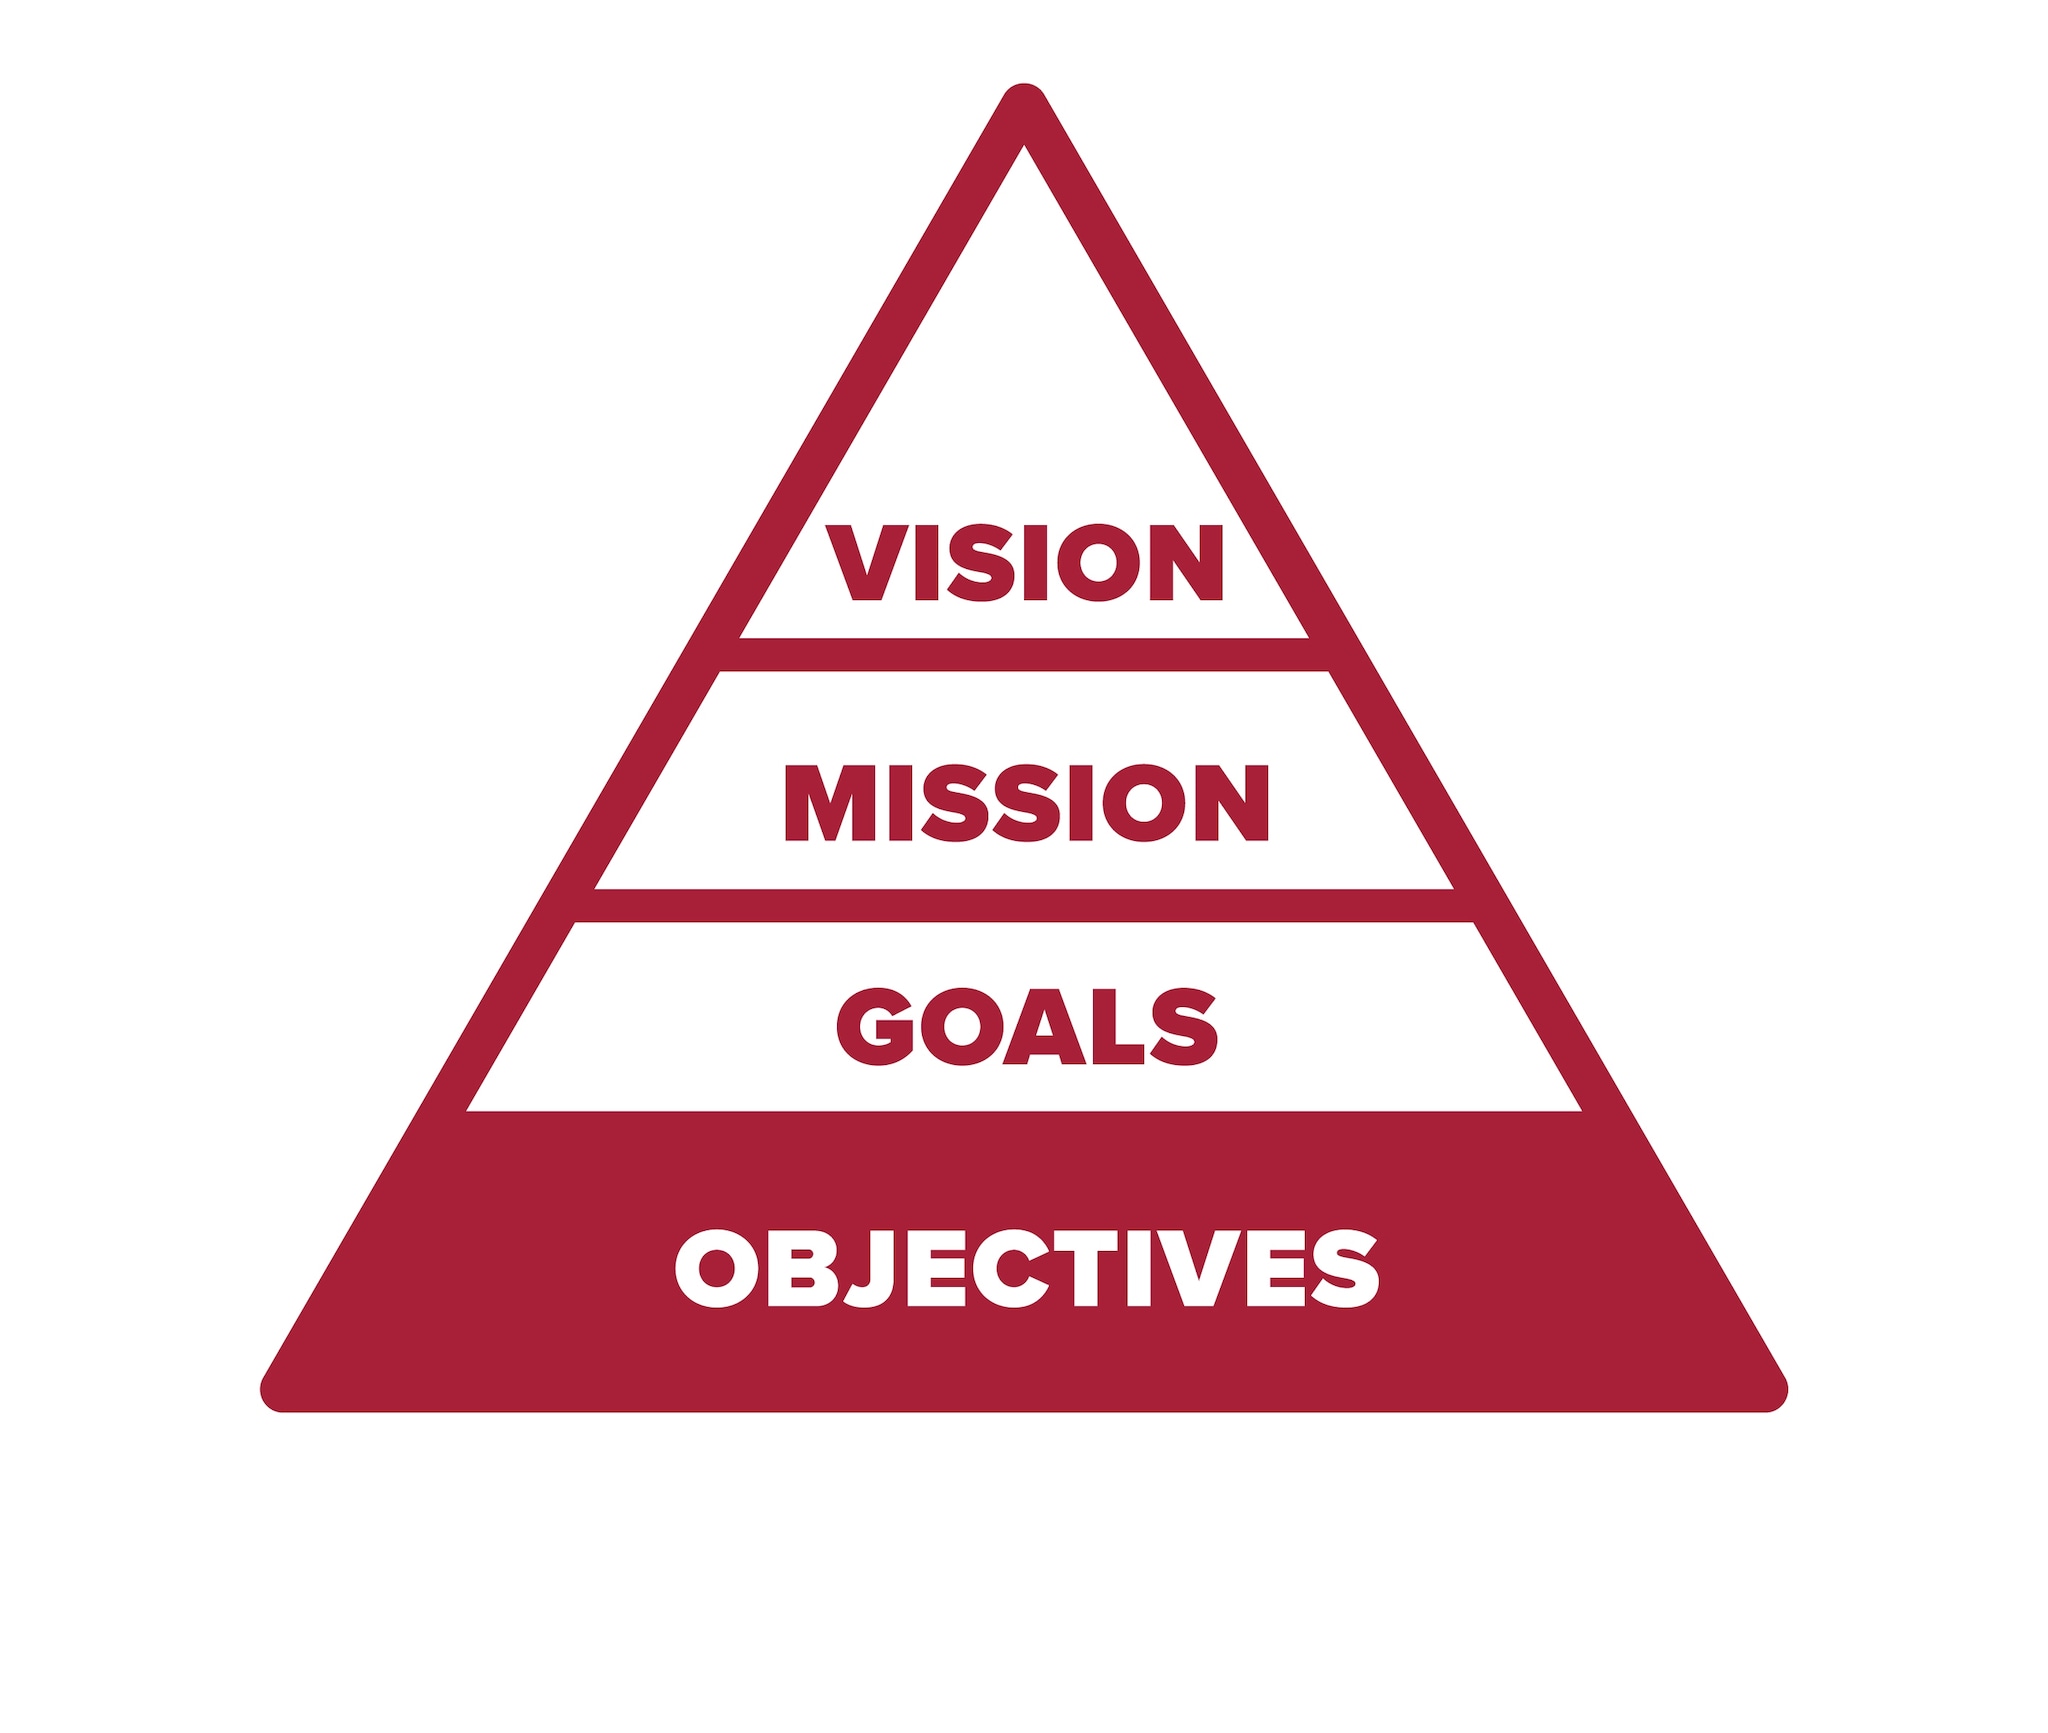 Image of objectives icon